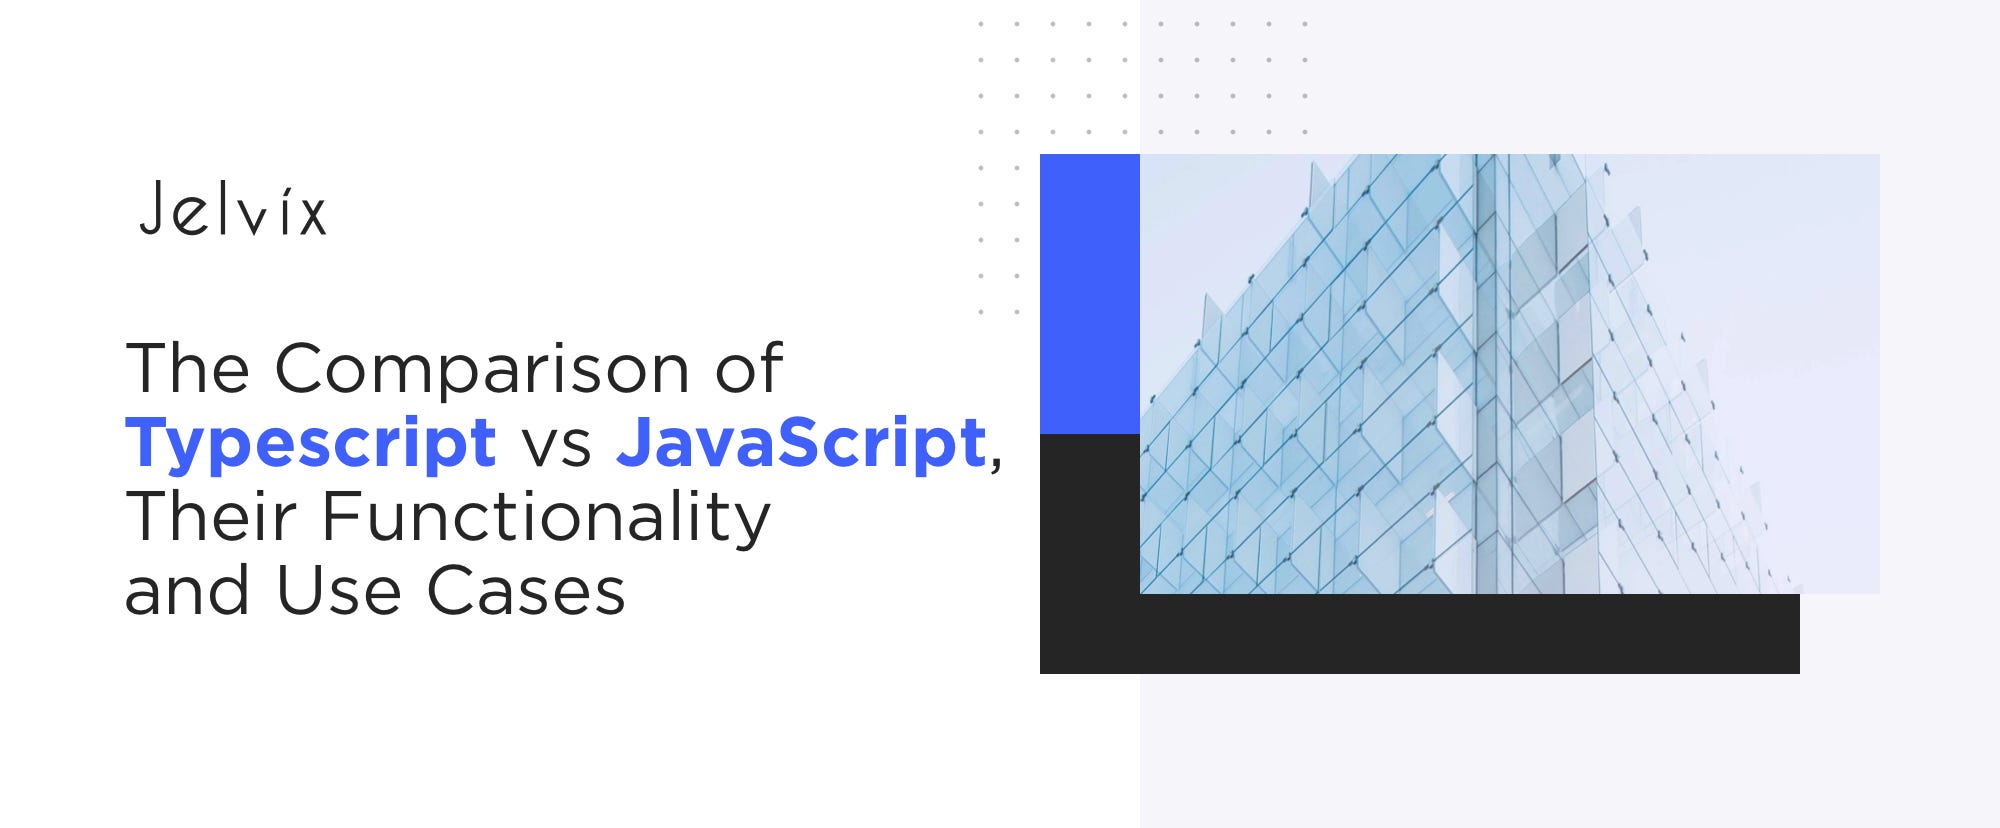 23 What Are The Advantages And Disadvantages Of Using Javascript